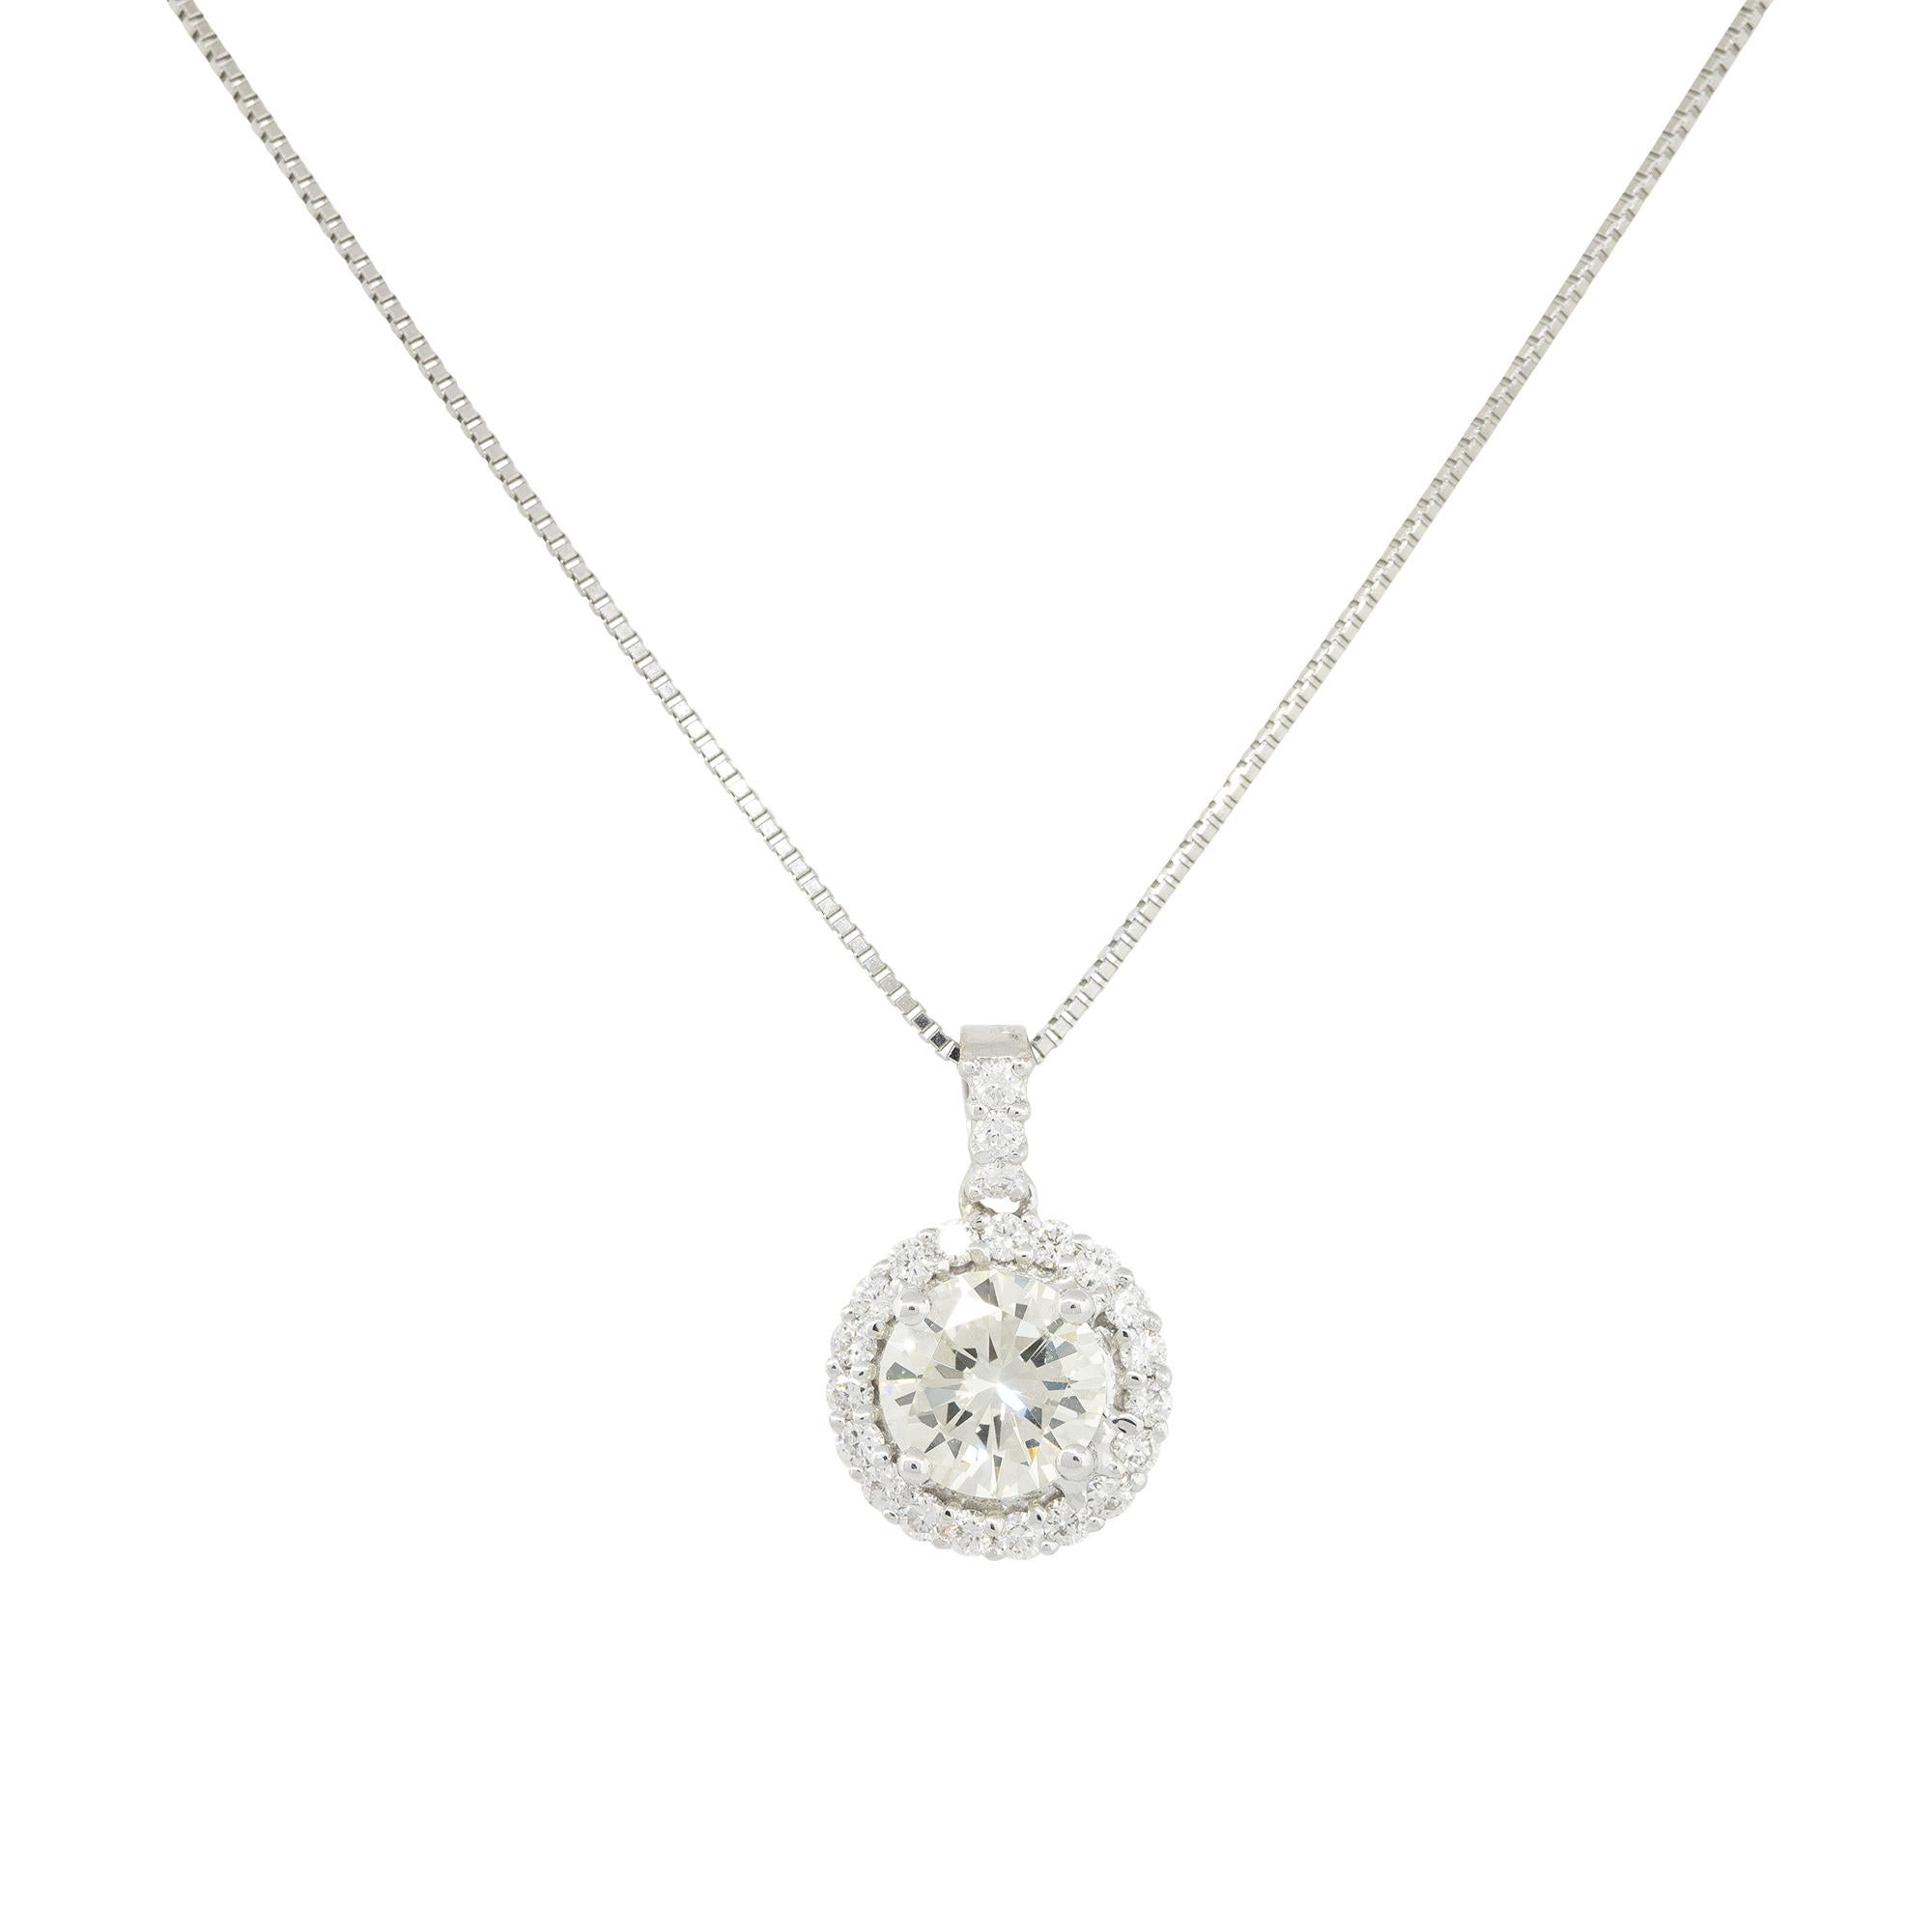 Round Cut GIA Certified 1.40 Carat Diamond Halo Necklace 18 Karat In Stock For Sale